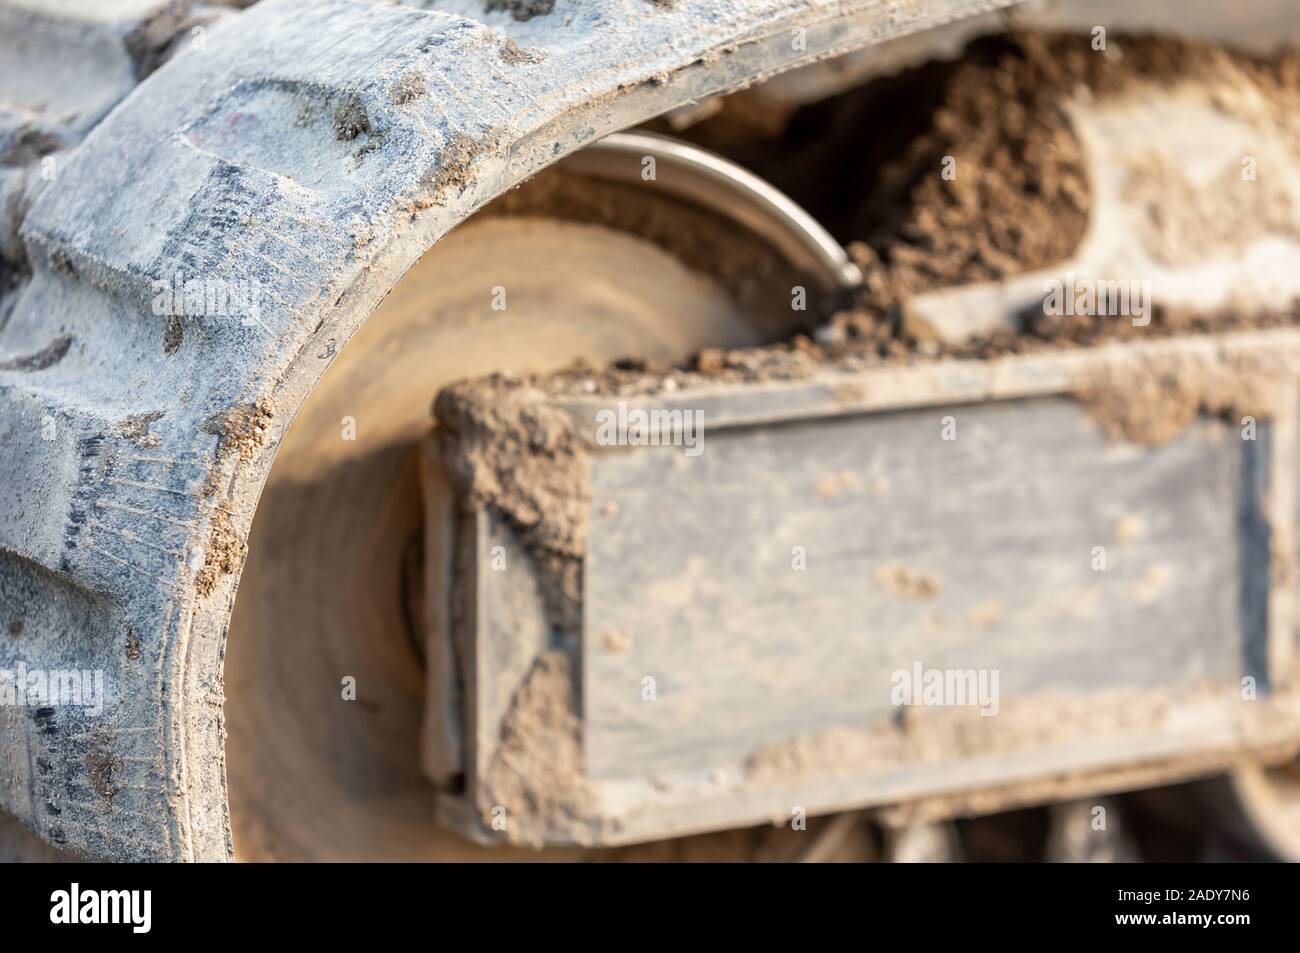 Detail image of the rubber tracks on a bulldozer Stock Photo